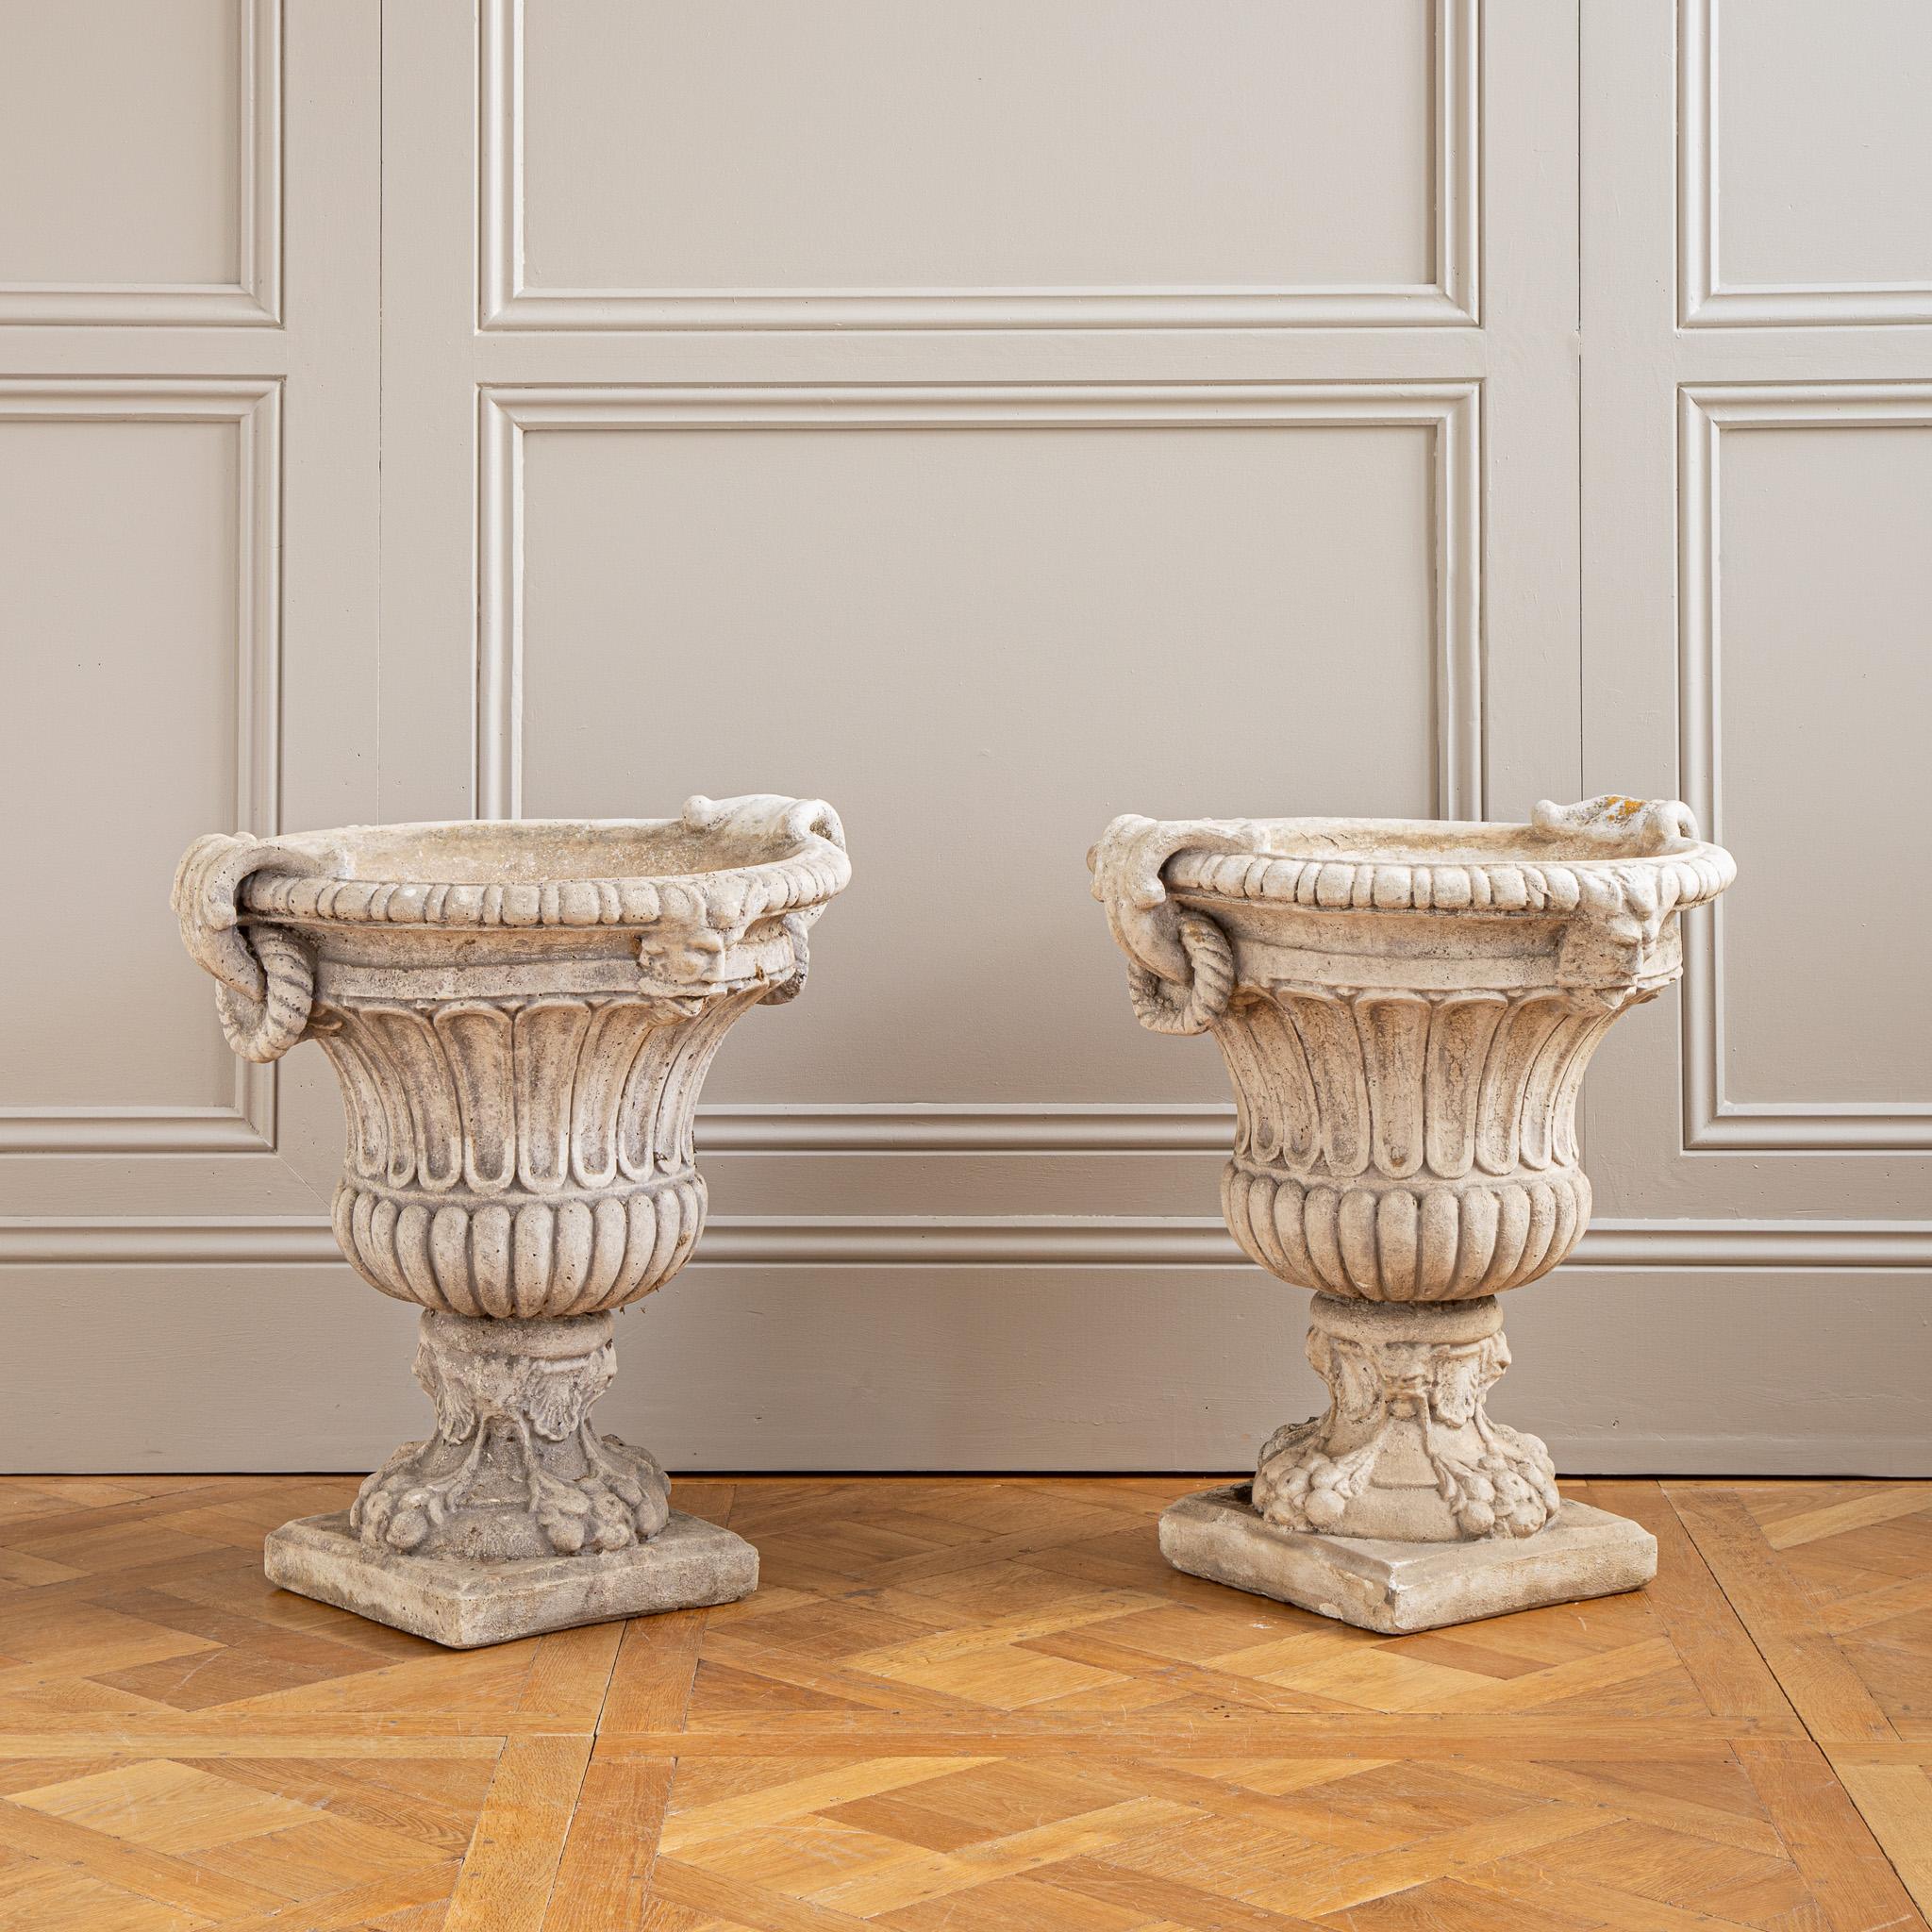 20th Century Circa Mid 1900's Set Of 4 Decorative Italian Garden Urns In Reconstituted Stone For Sale